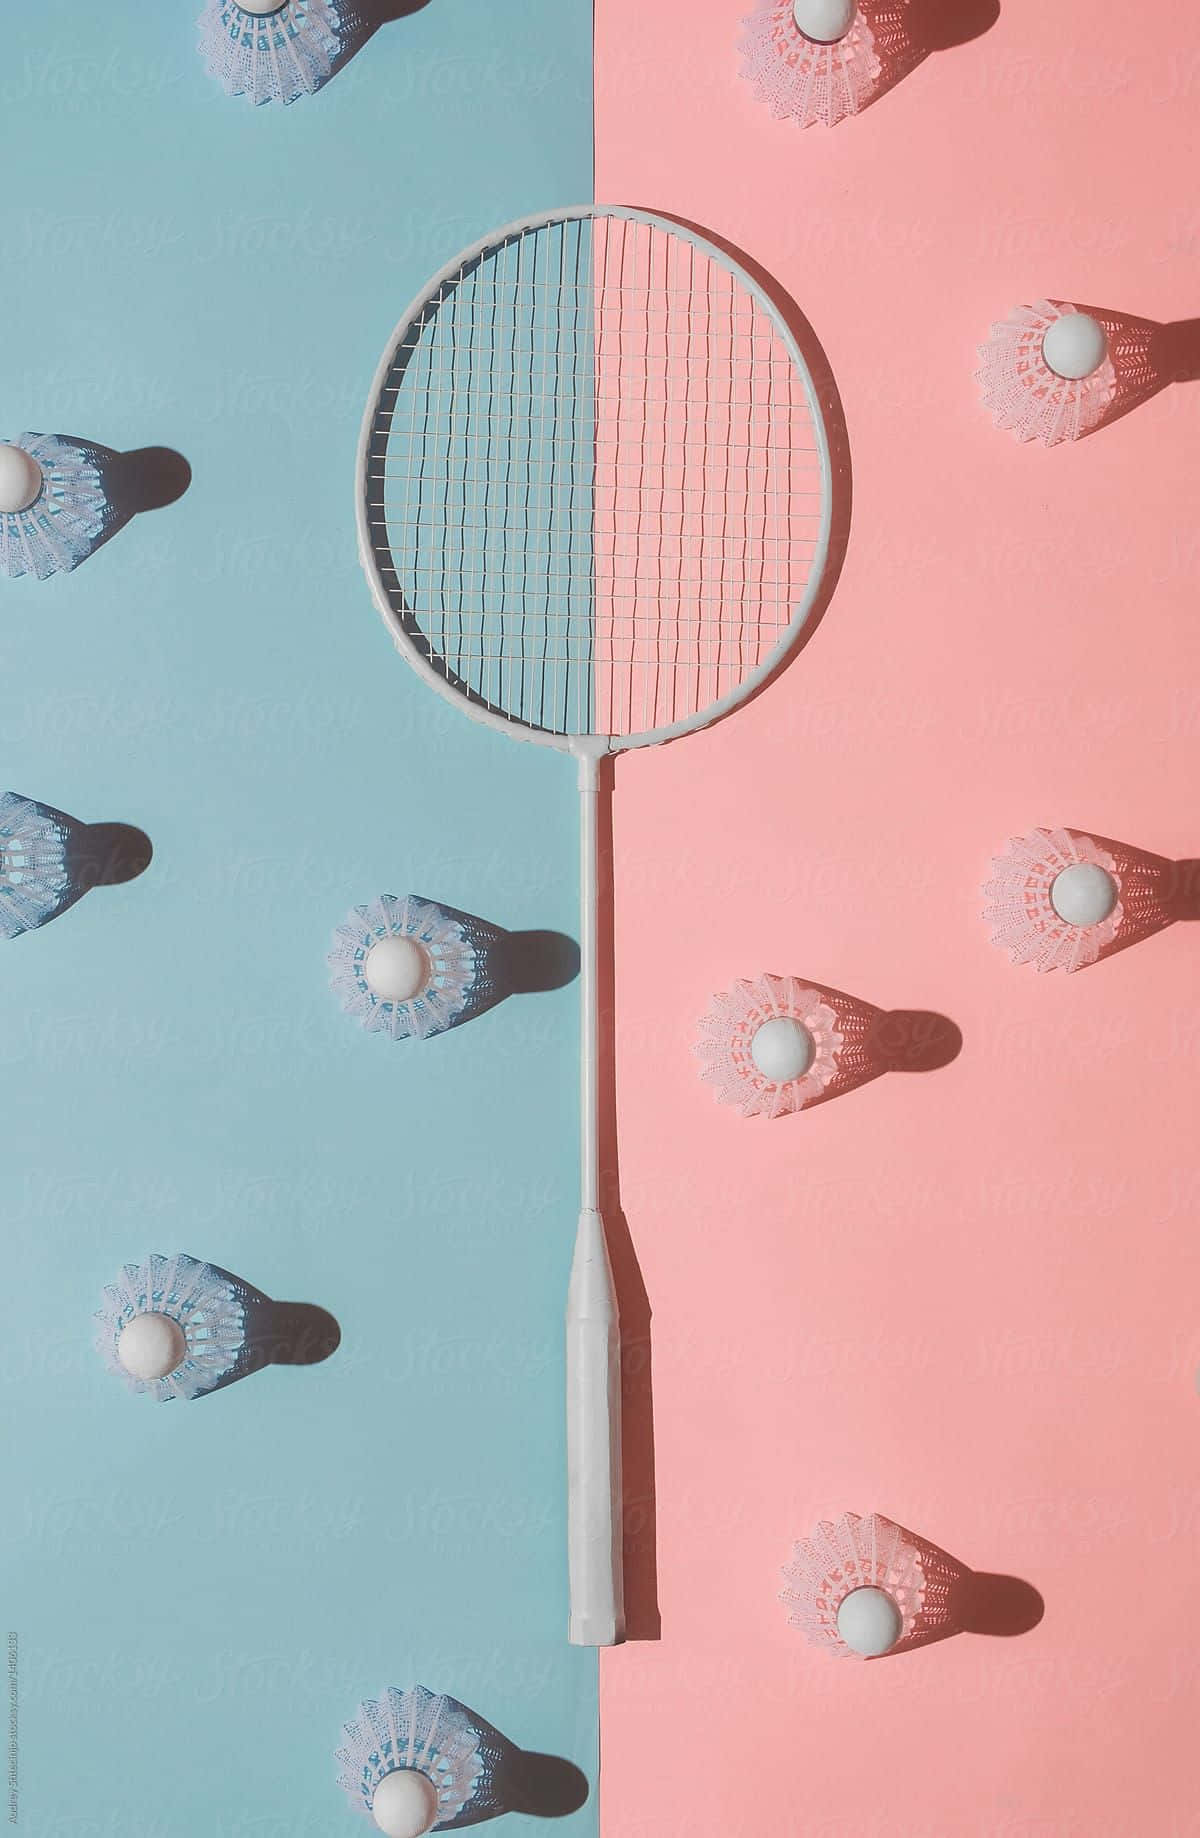 Badminton Racket On A Pink And Blue Background By Samantha Mcdonald For Stocksy United